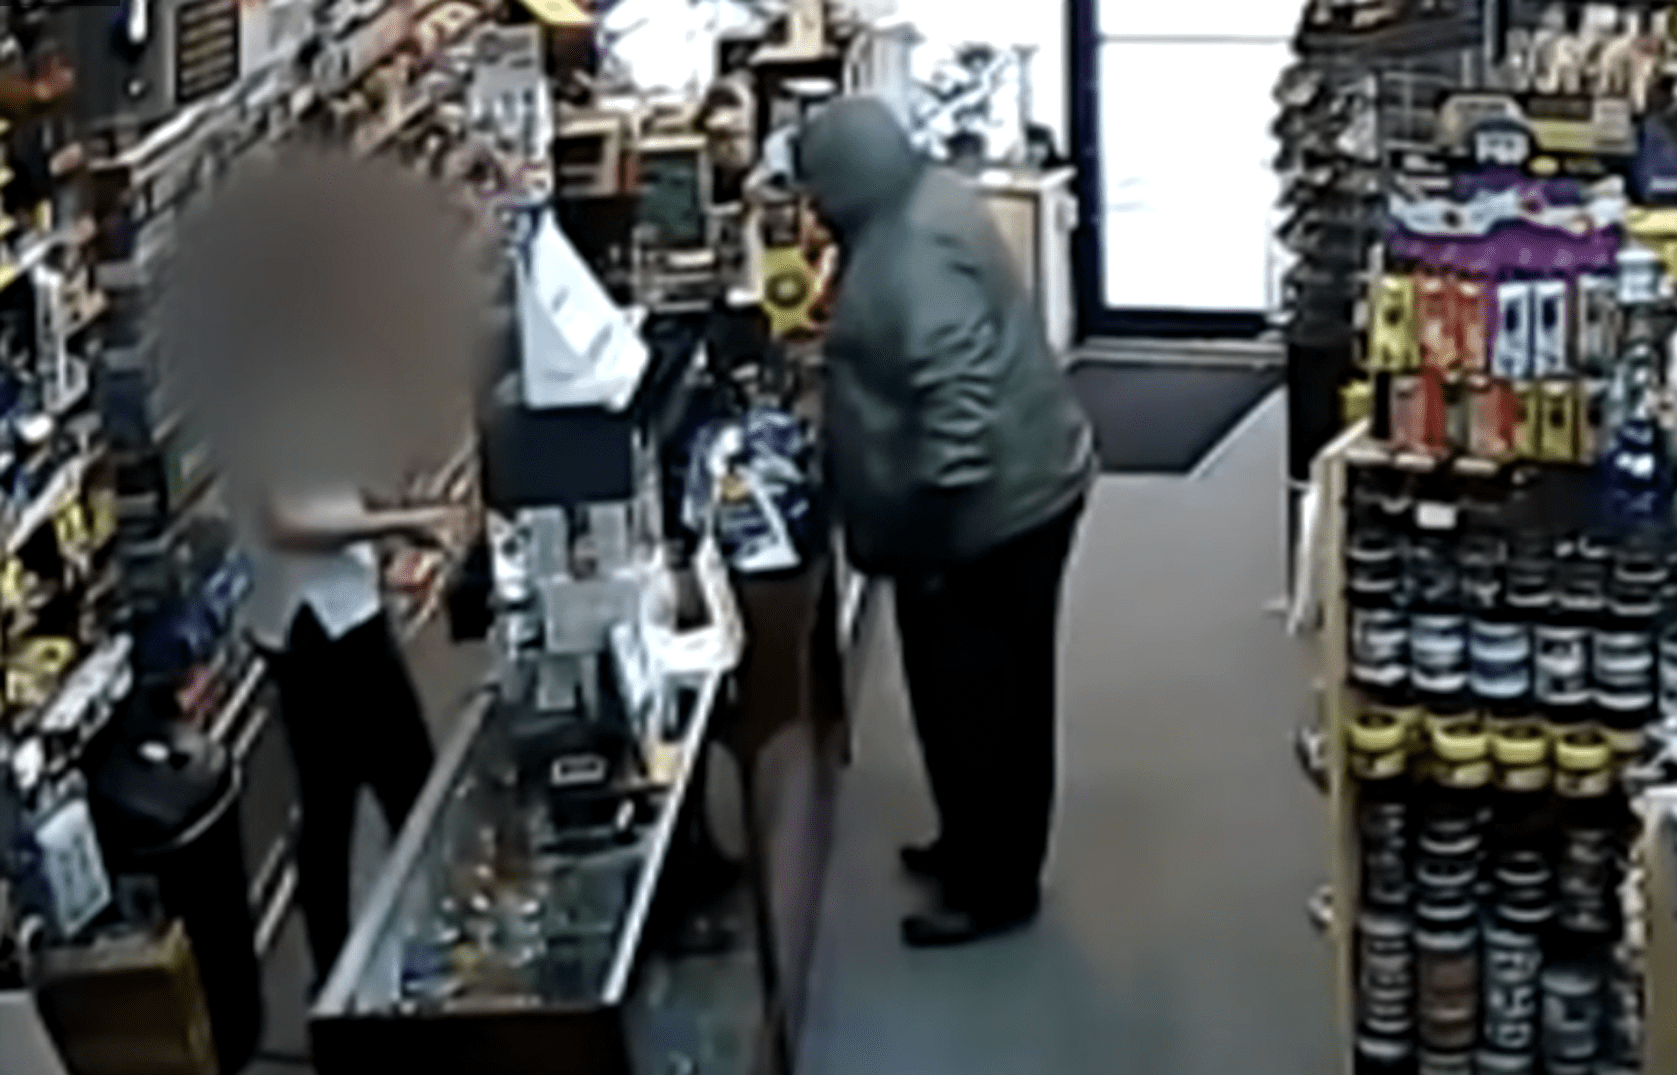 Disguised man with a gun standing in front of the cashier at a store as she opens the cash register.┃Source: youtube.com/CBS 17